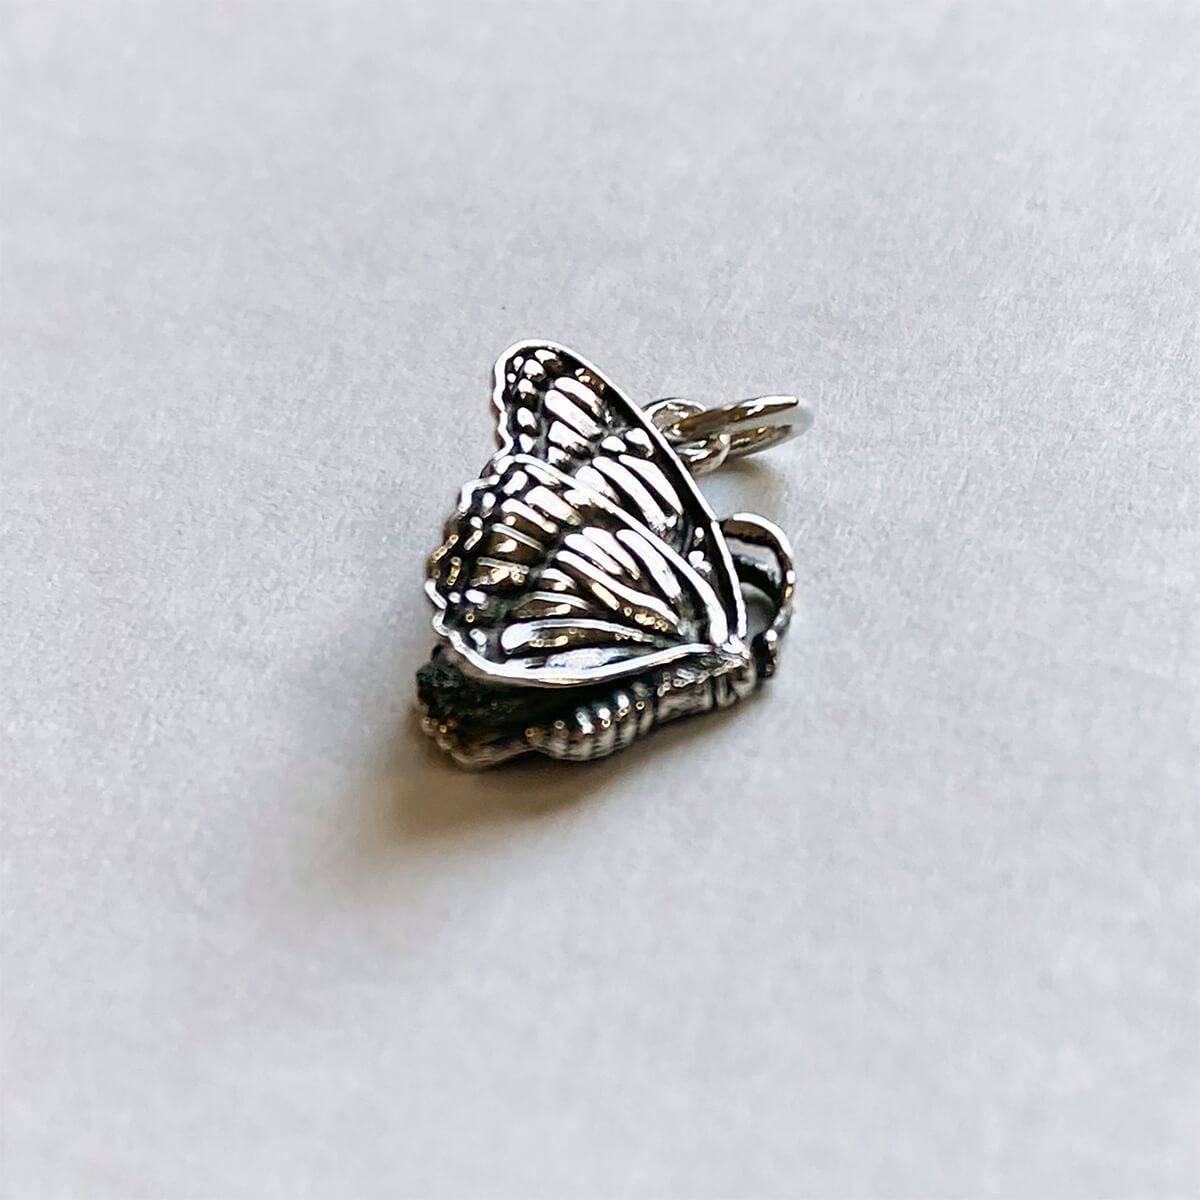 3D Butterfly charm with lovely detail sterling silver pendant